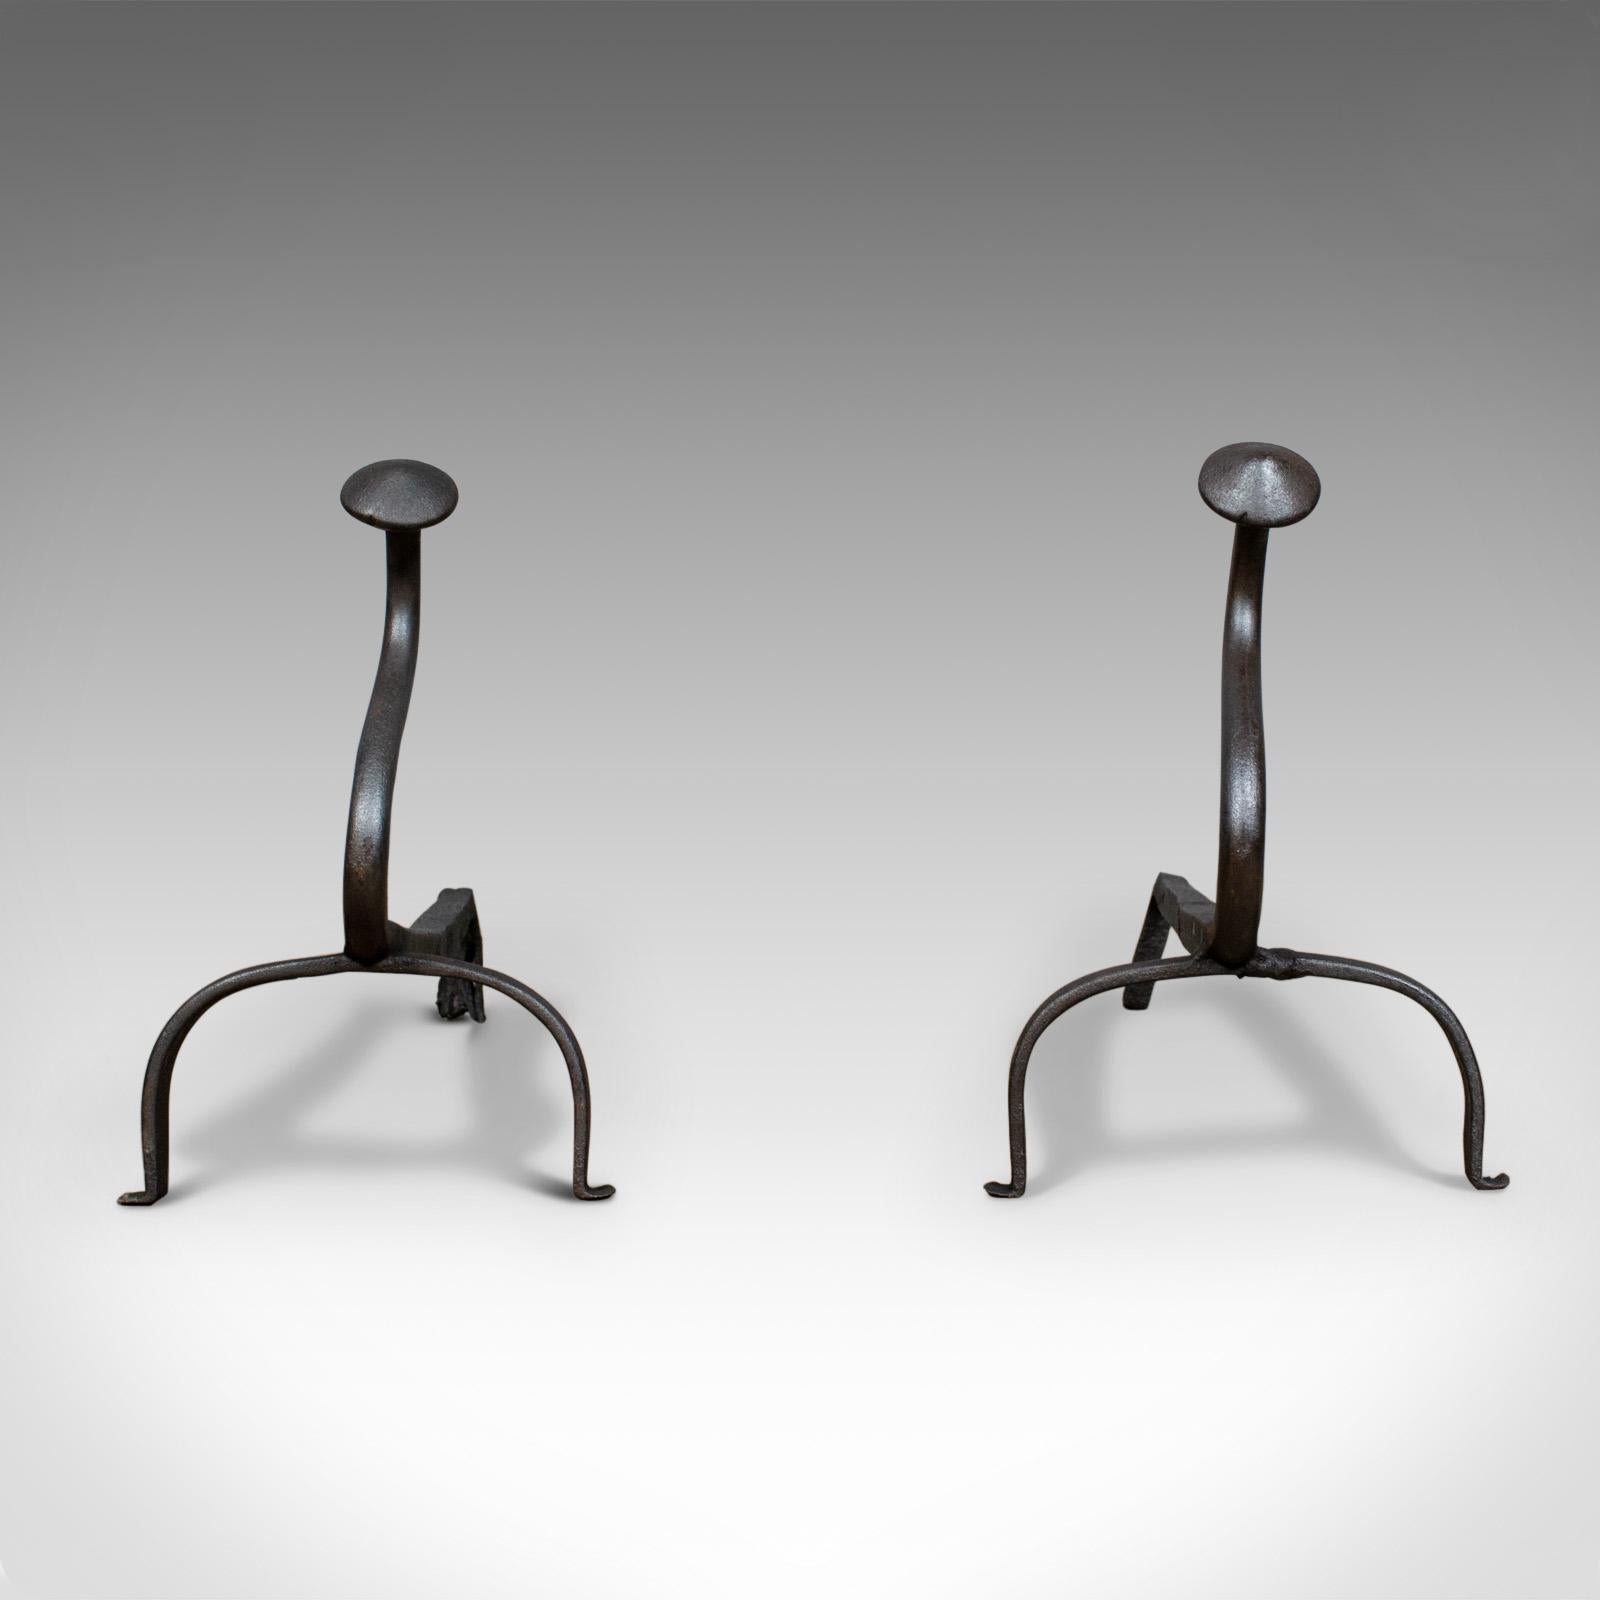 This is a pair of antique andirons. French, wrought iron firedogs forged around the turn of the 20th century, circa 1900.

Attractive, sinuous andirons ideal for a large fire basket
Standing upon a forward arch leg and a pair of basket